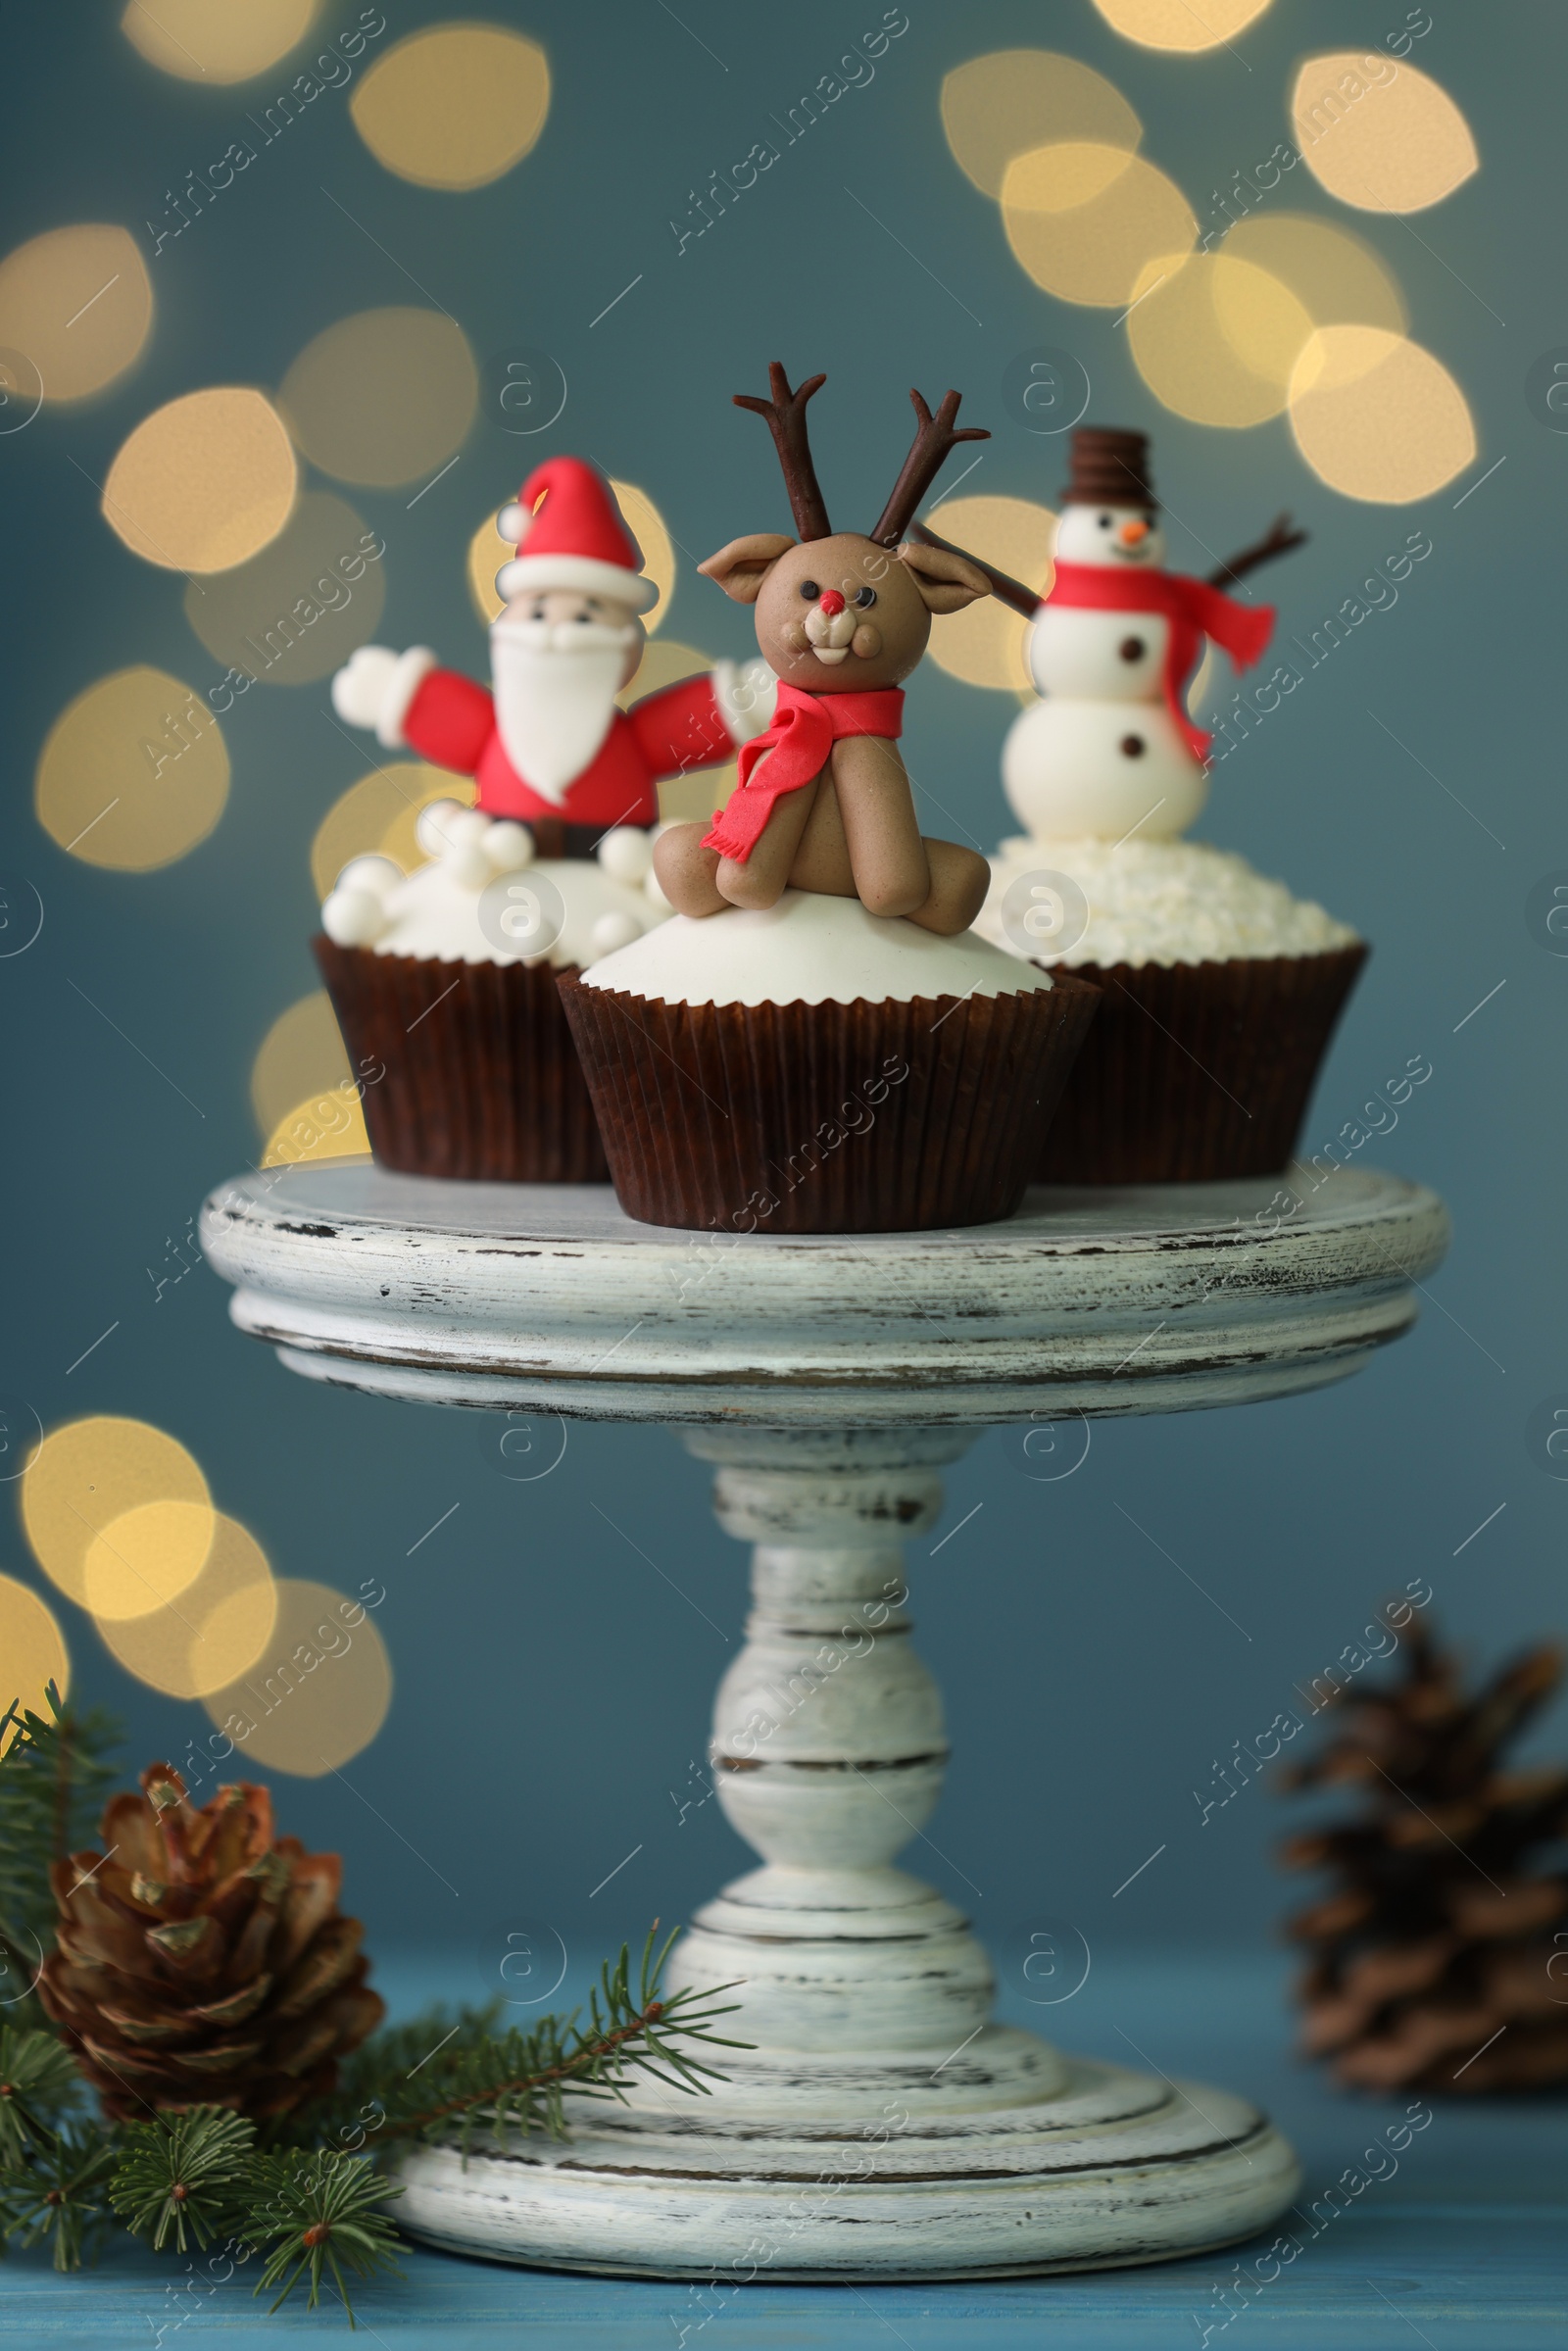 Photo of Tasty Christmas cupcakes on blue wooden table against blurred festive lights